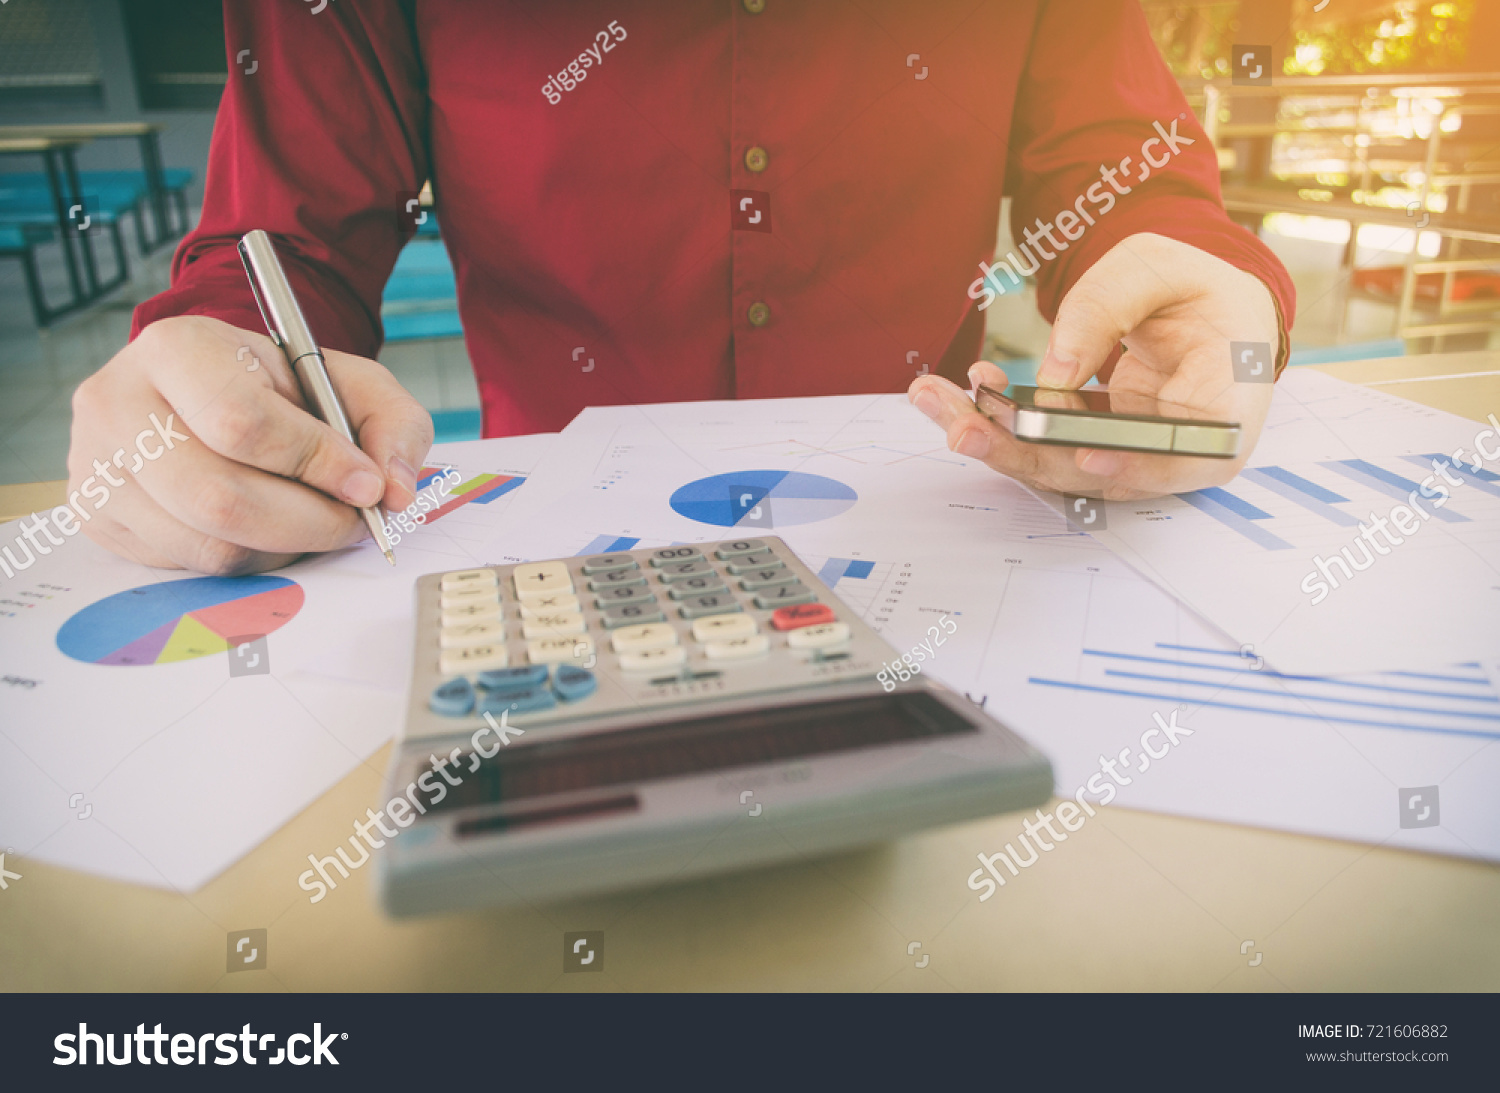 hand working writing and using smart phone with business strategy diagram report, calculator on desk at home office, income and expenses, finance, searching data, money cost savings, economy concept #721606882